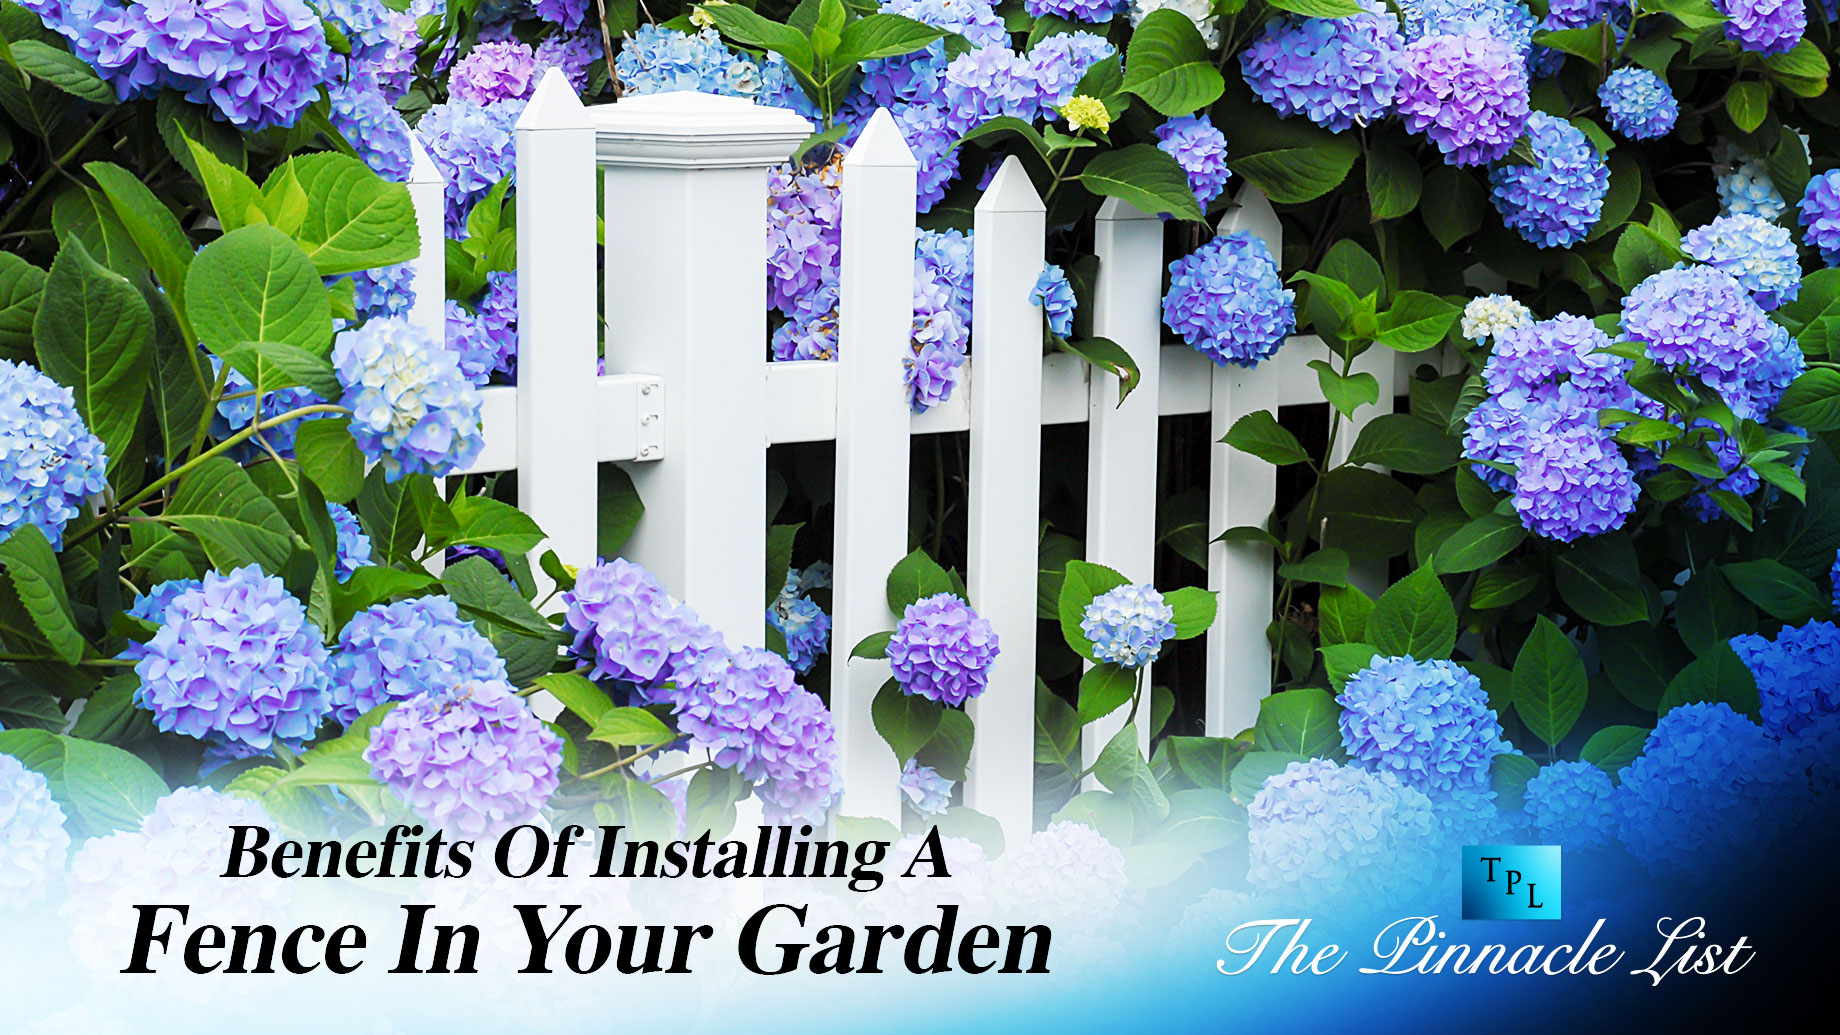 Benefits of Installing A Fence In Your Garden